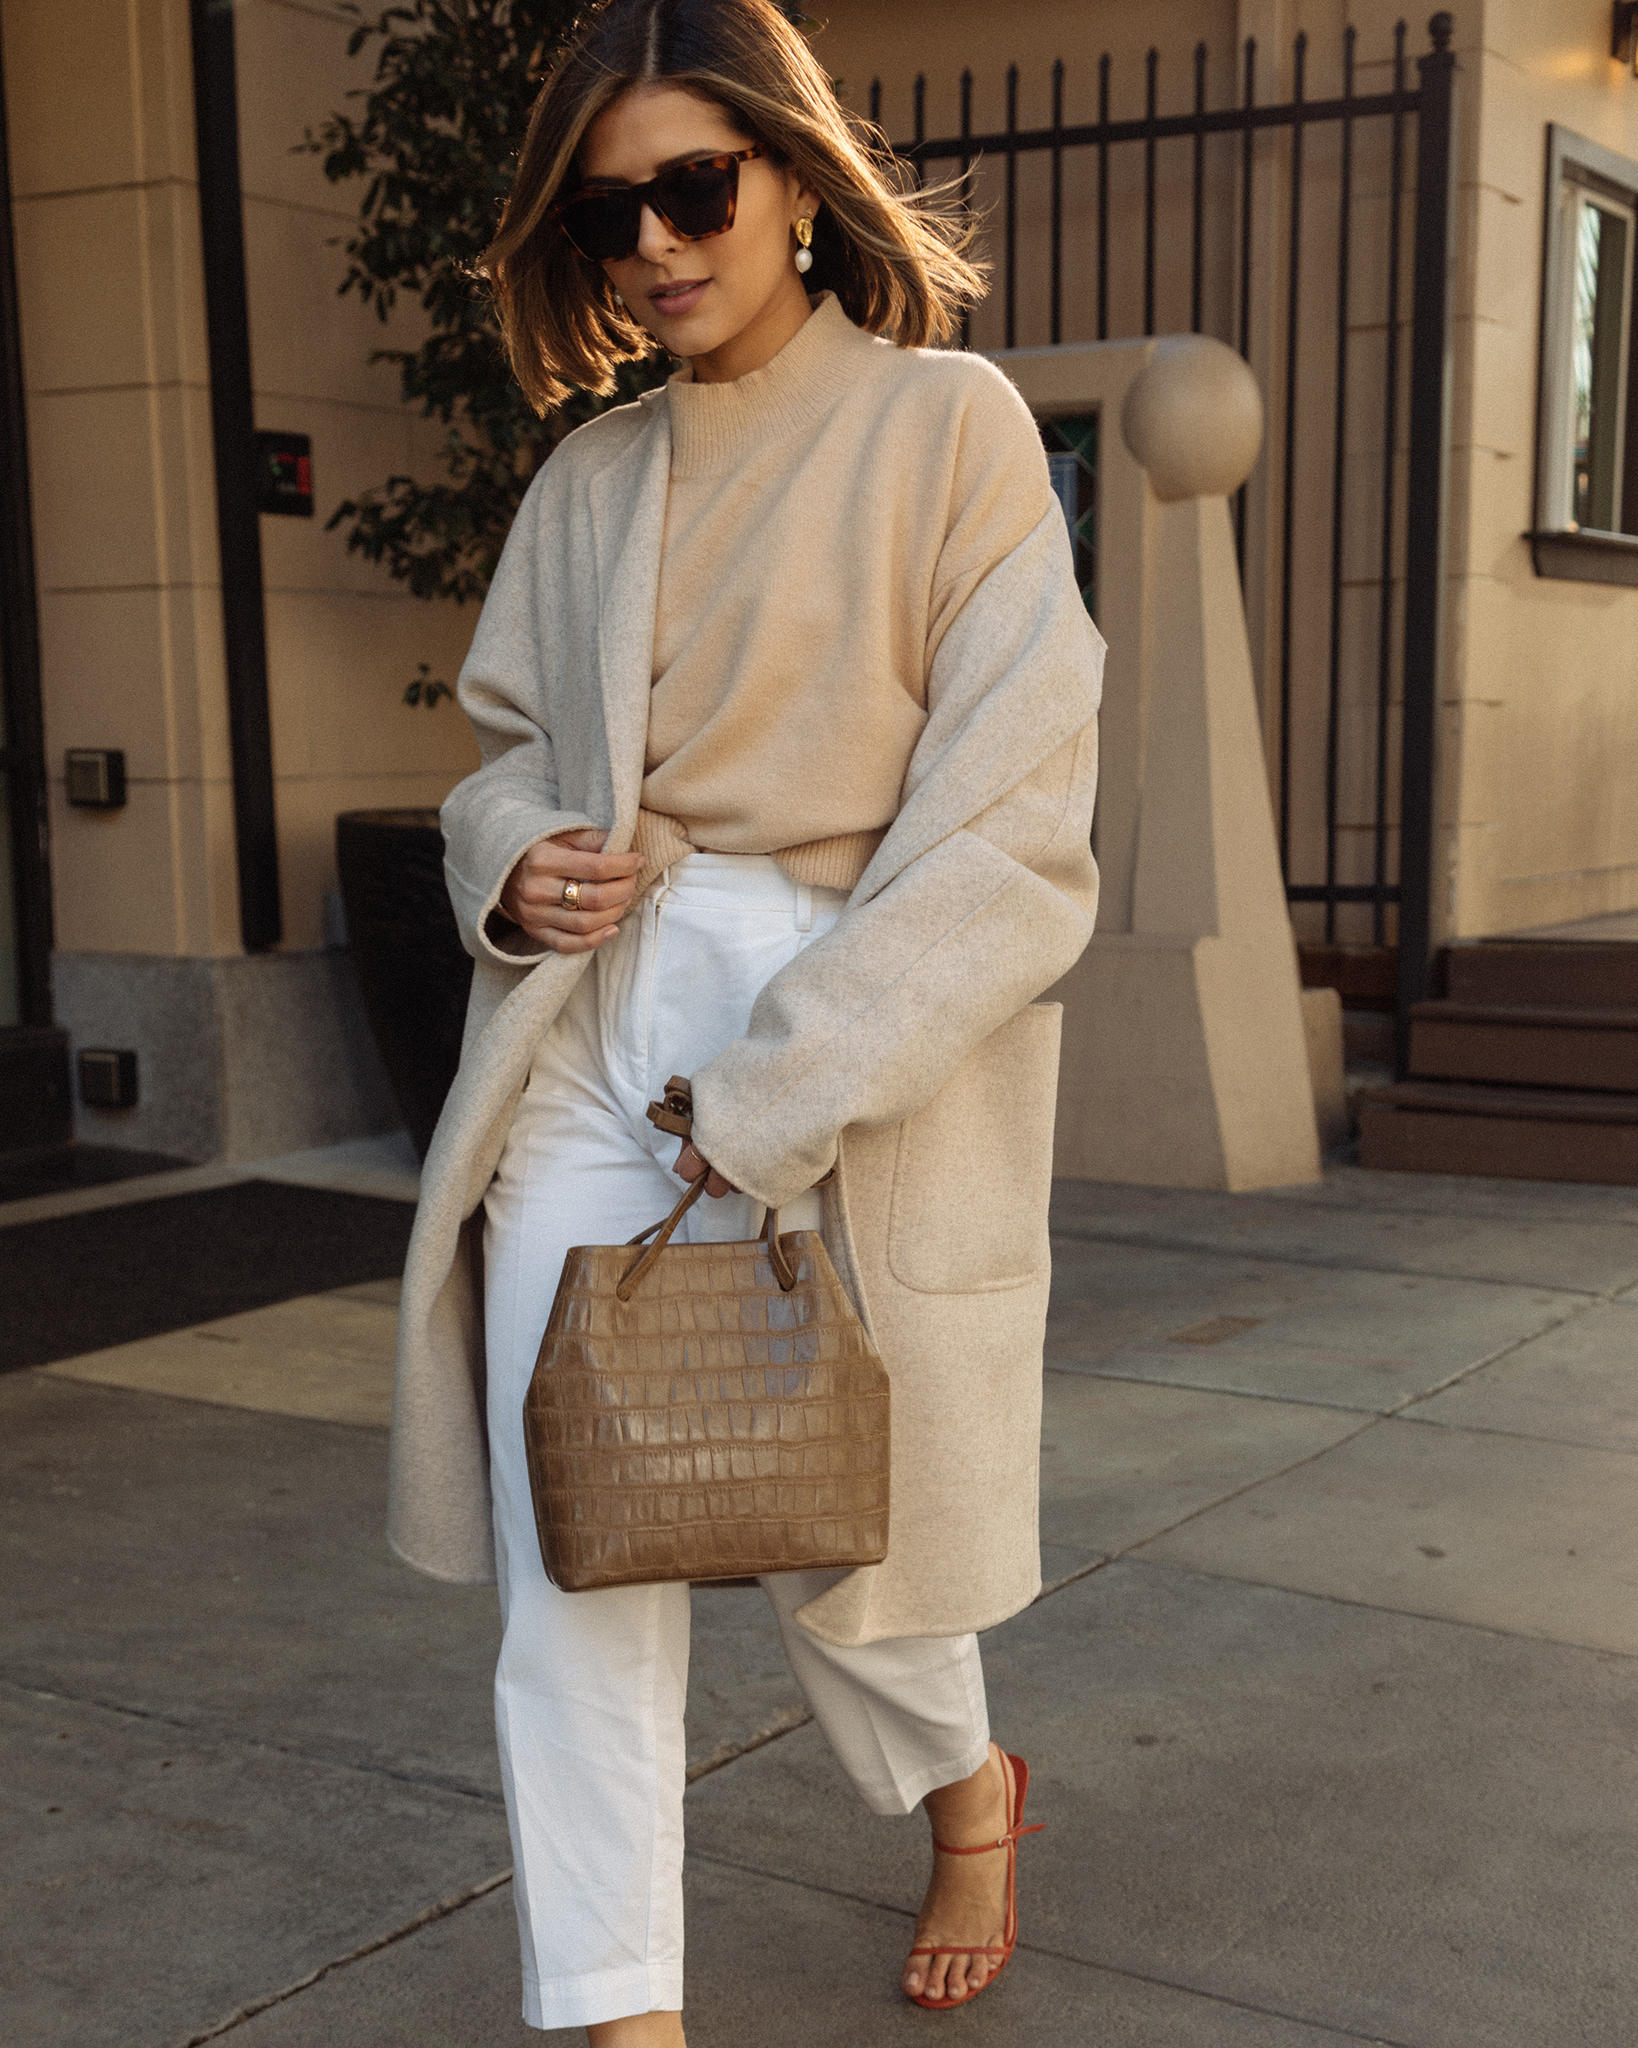 The 2019 Way to Wear Neutrals by Pam Hetlinger | TheGirlFromPanama.com | Spring 2019 nude trends, monochromatic beige outfit, white trousers, spring outfit